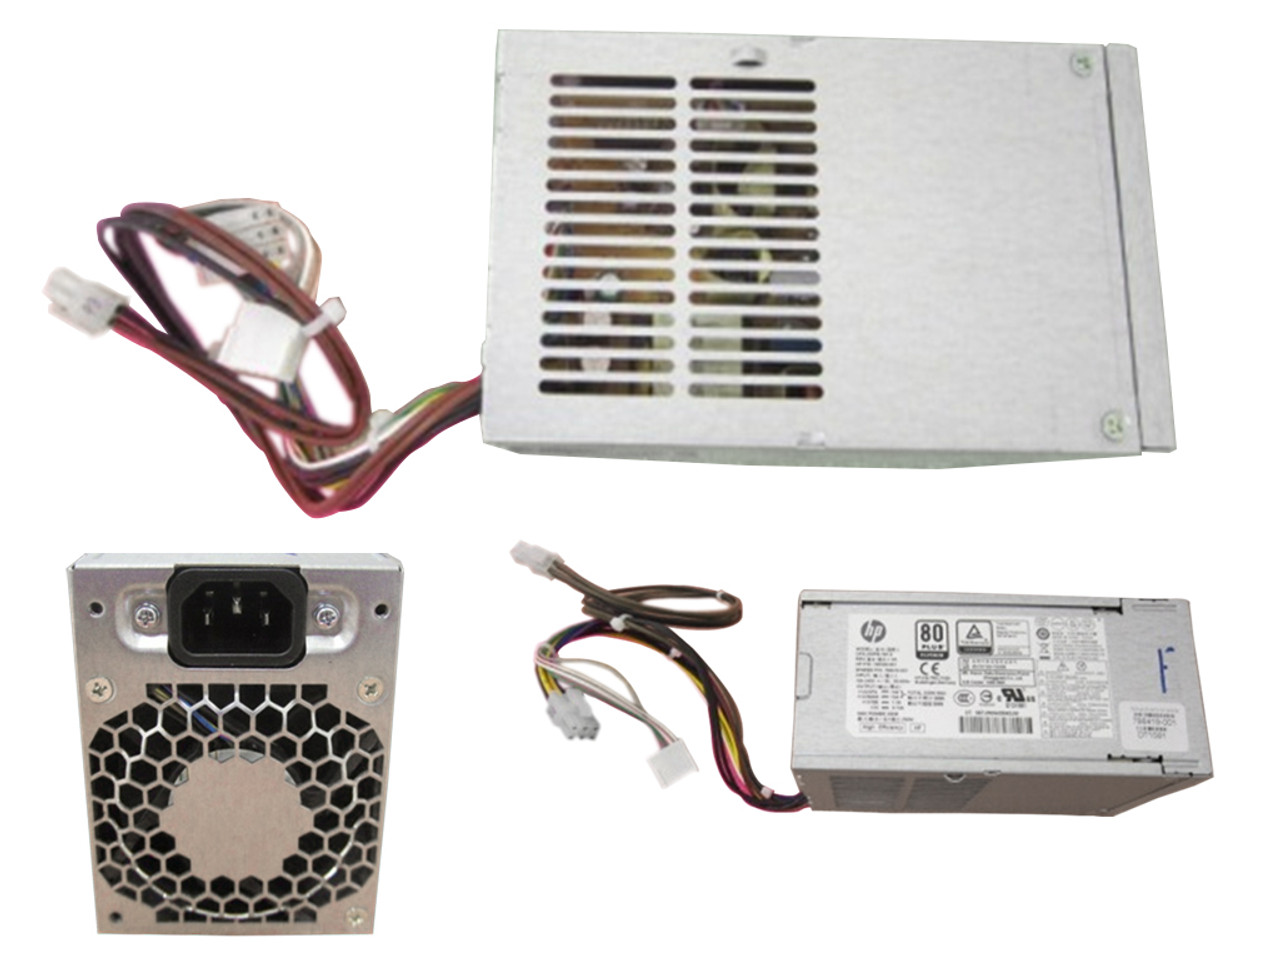 SPS-P/S SFF 200W ENT15 92pct EFF12V 4OUT - 796419-001